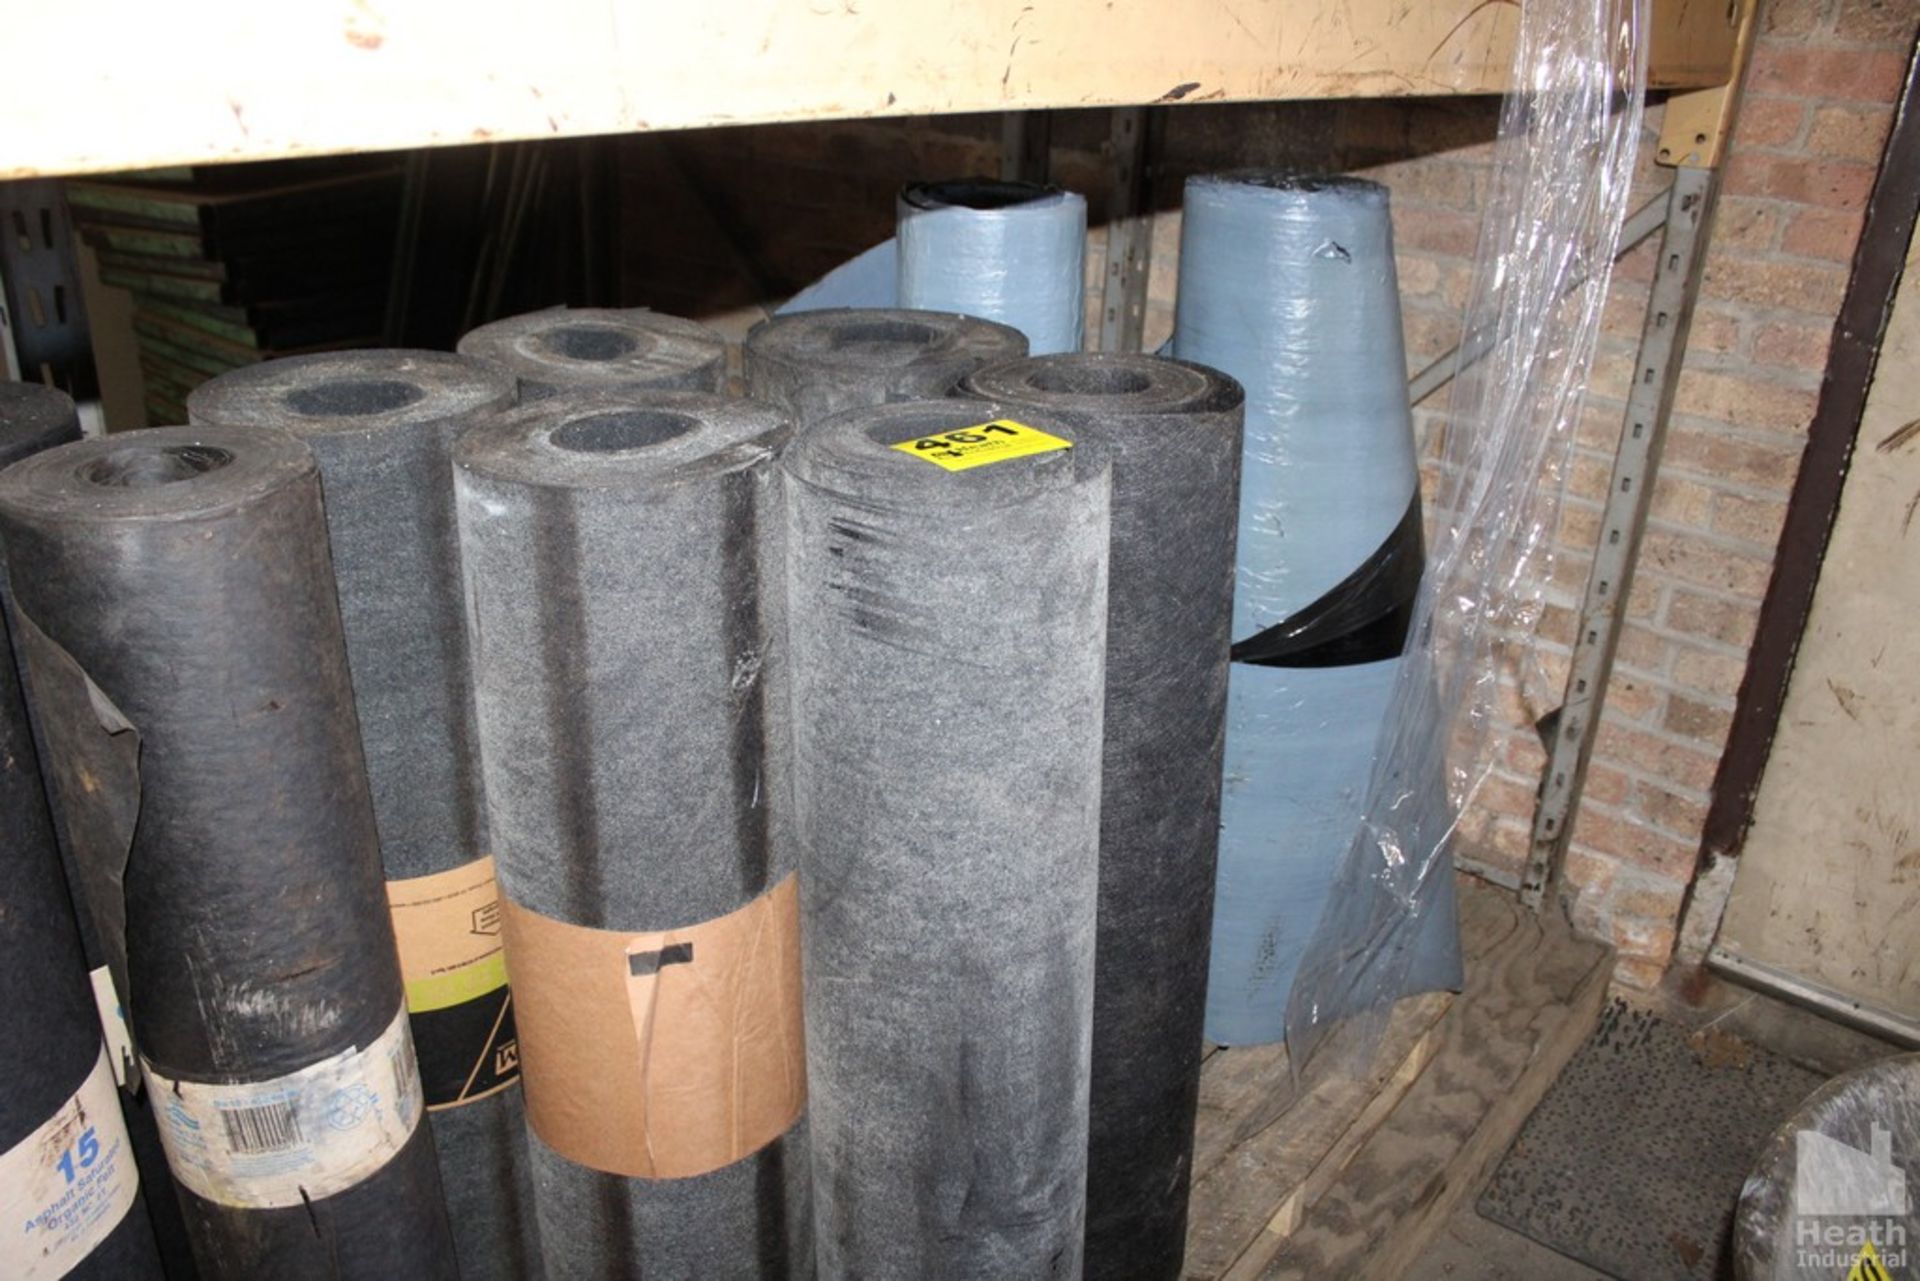 (6) ROLLS OF ROOFING FELT AND (2) ROLLS OF MEMBRANE ON PALLET